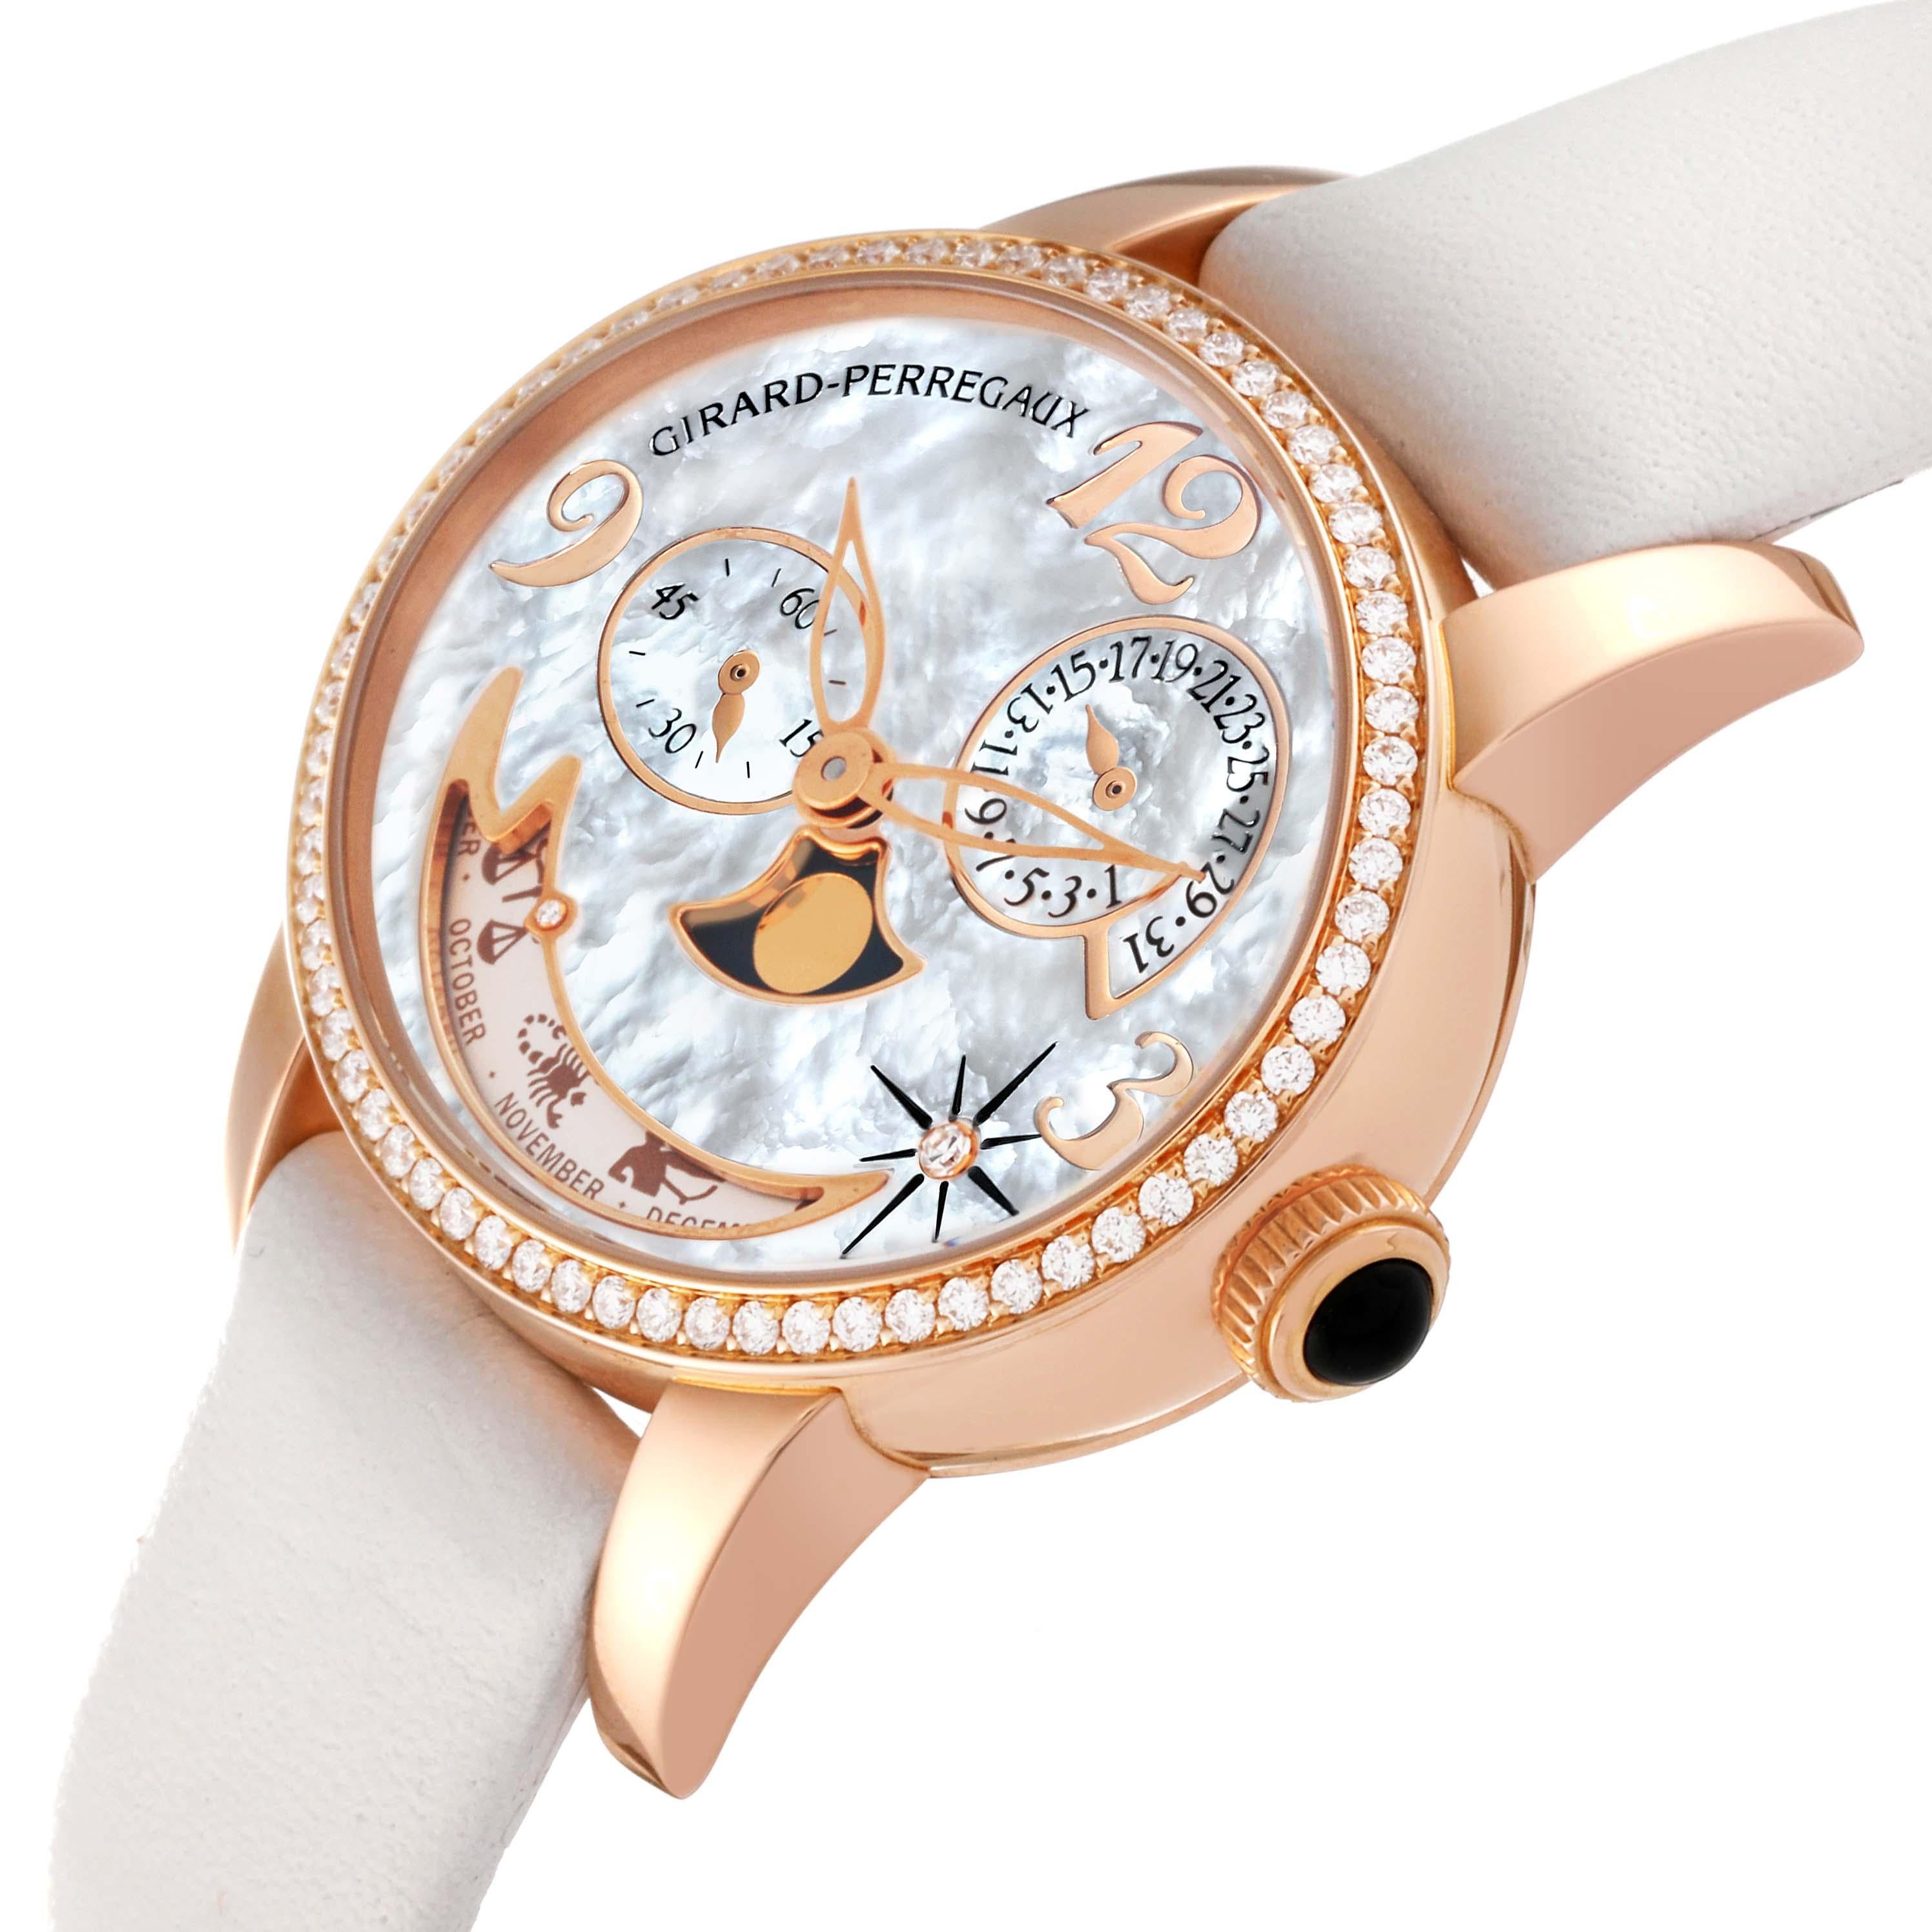 Girard Perregaux Cat's Eye Rose Gold Mother Of Pearl Diamond Ladies Watch 80483 Box Papers. Automatic self-winding movement. Oval shaped 18K rose gold case 35.40 x 30.40 mm. Exhibition transparent sapphire crystal caseback. 18K rose gold orginal